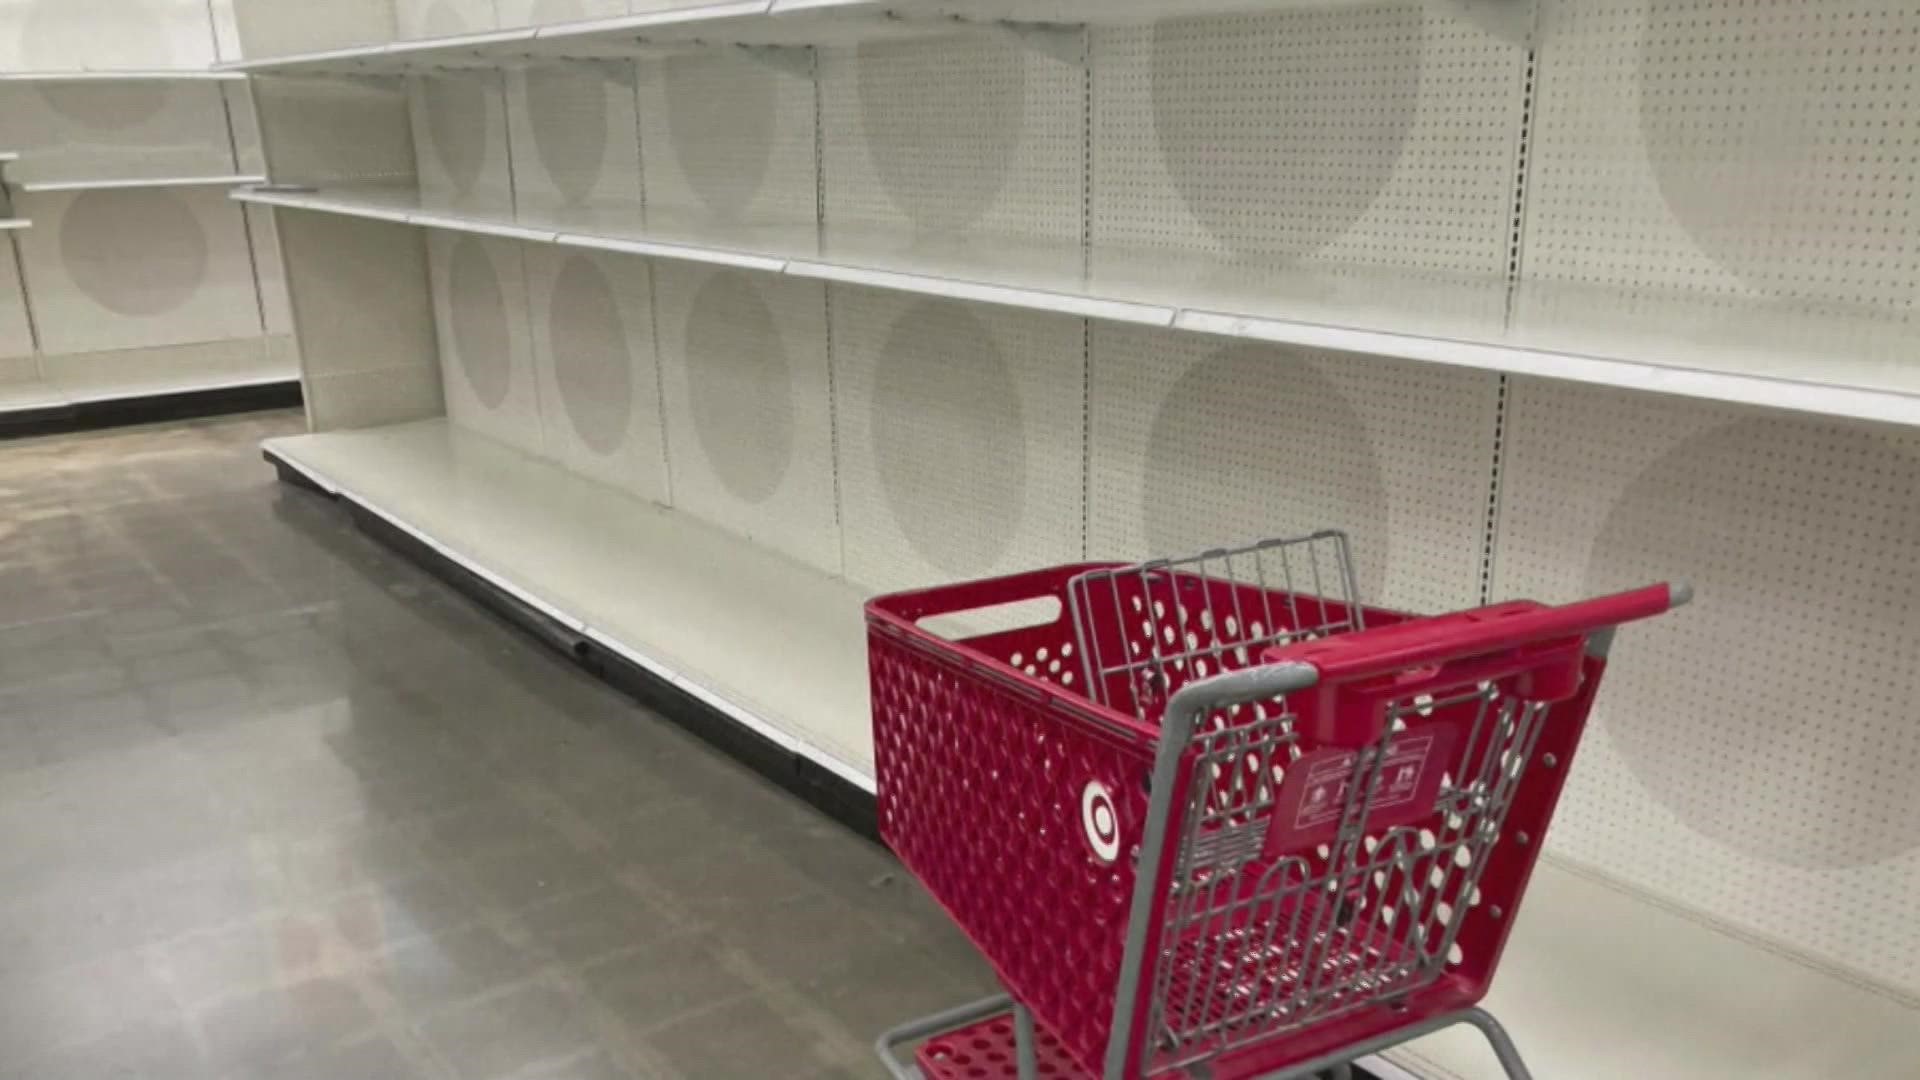 Video shot across America shows a number of stores where shelves are empty.